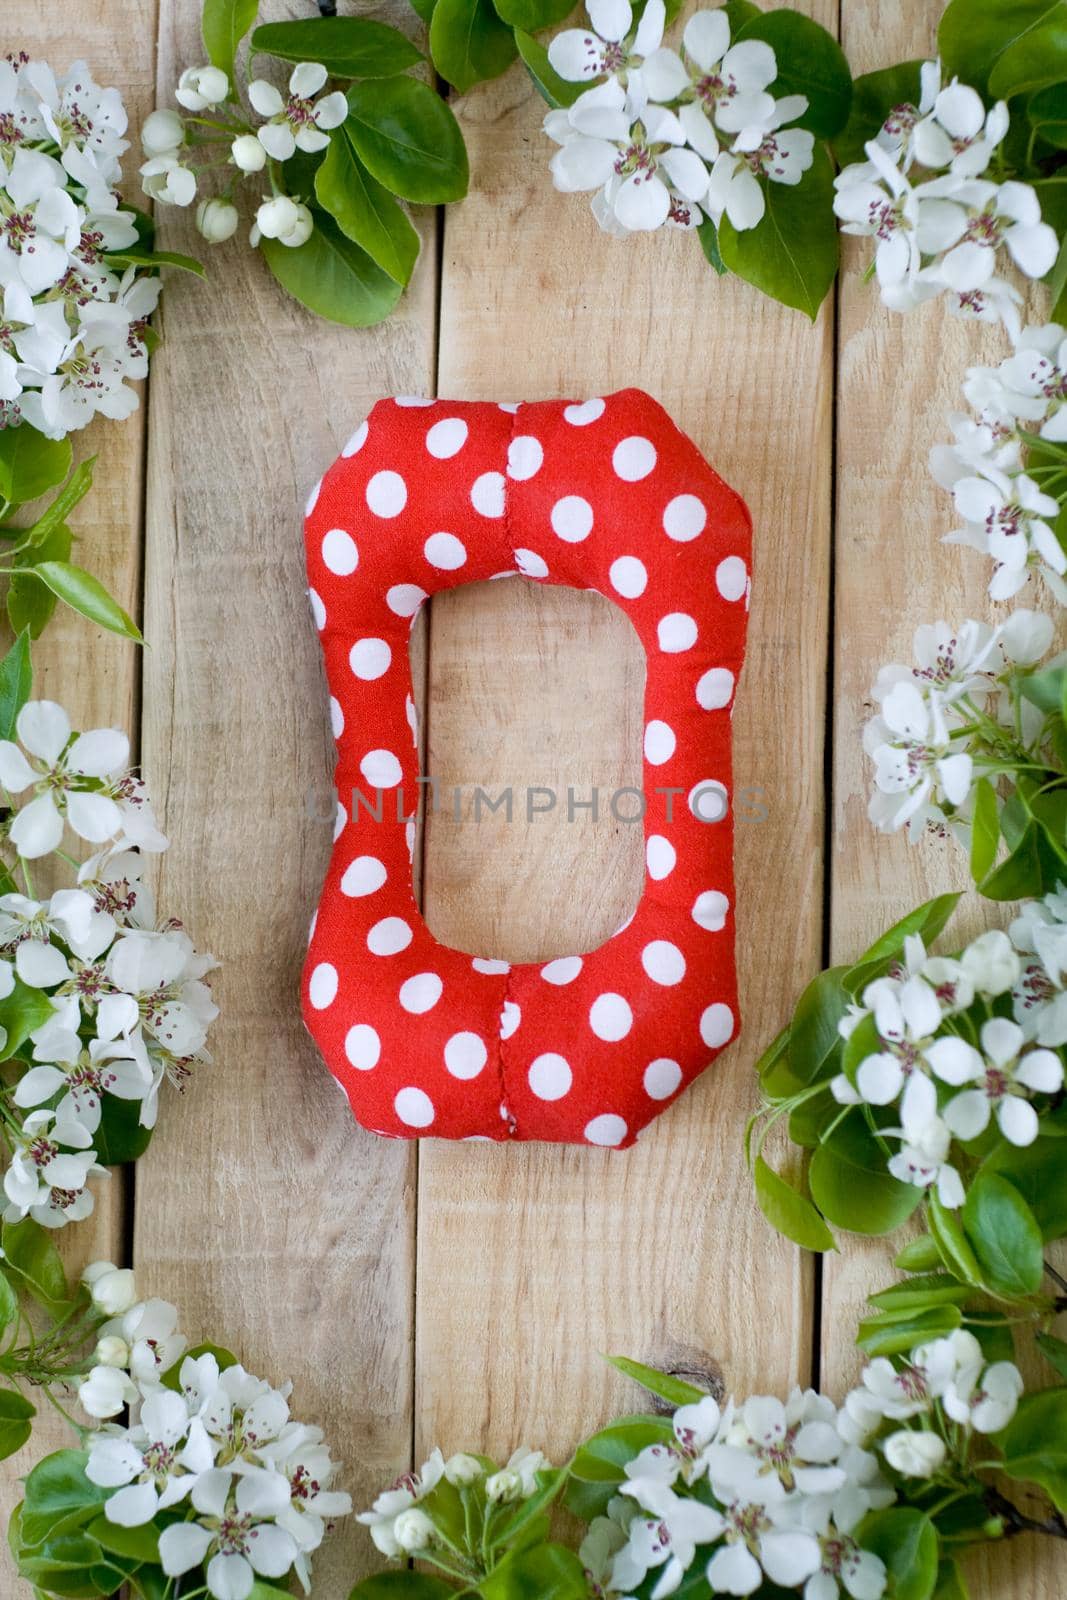 Natural wooden background with white flowers fruit tree. In the middle is the letter О, is made of red polka dot fabric.